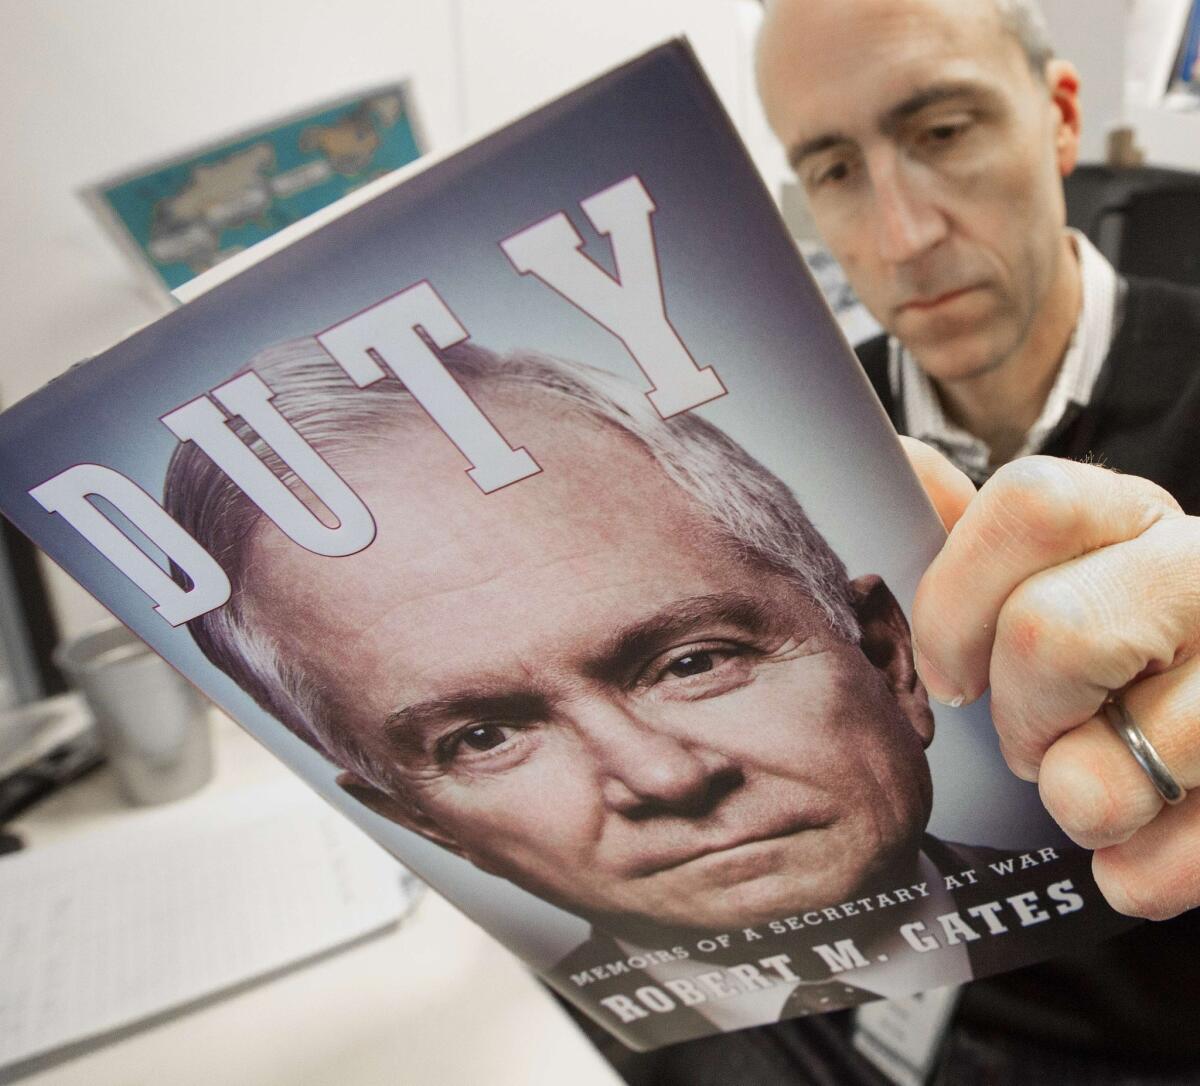 A journalist reads an advance copy of former U.S. Secretary of Defense Robert M. Gates' book, "Duty: Memoirs Of A Secretary At War," that is circulating among reporters in Washington, D.C.